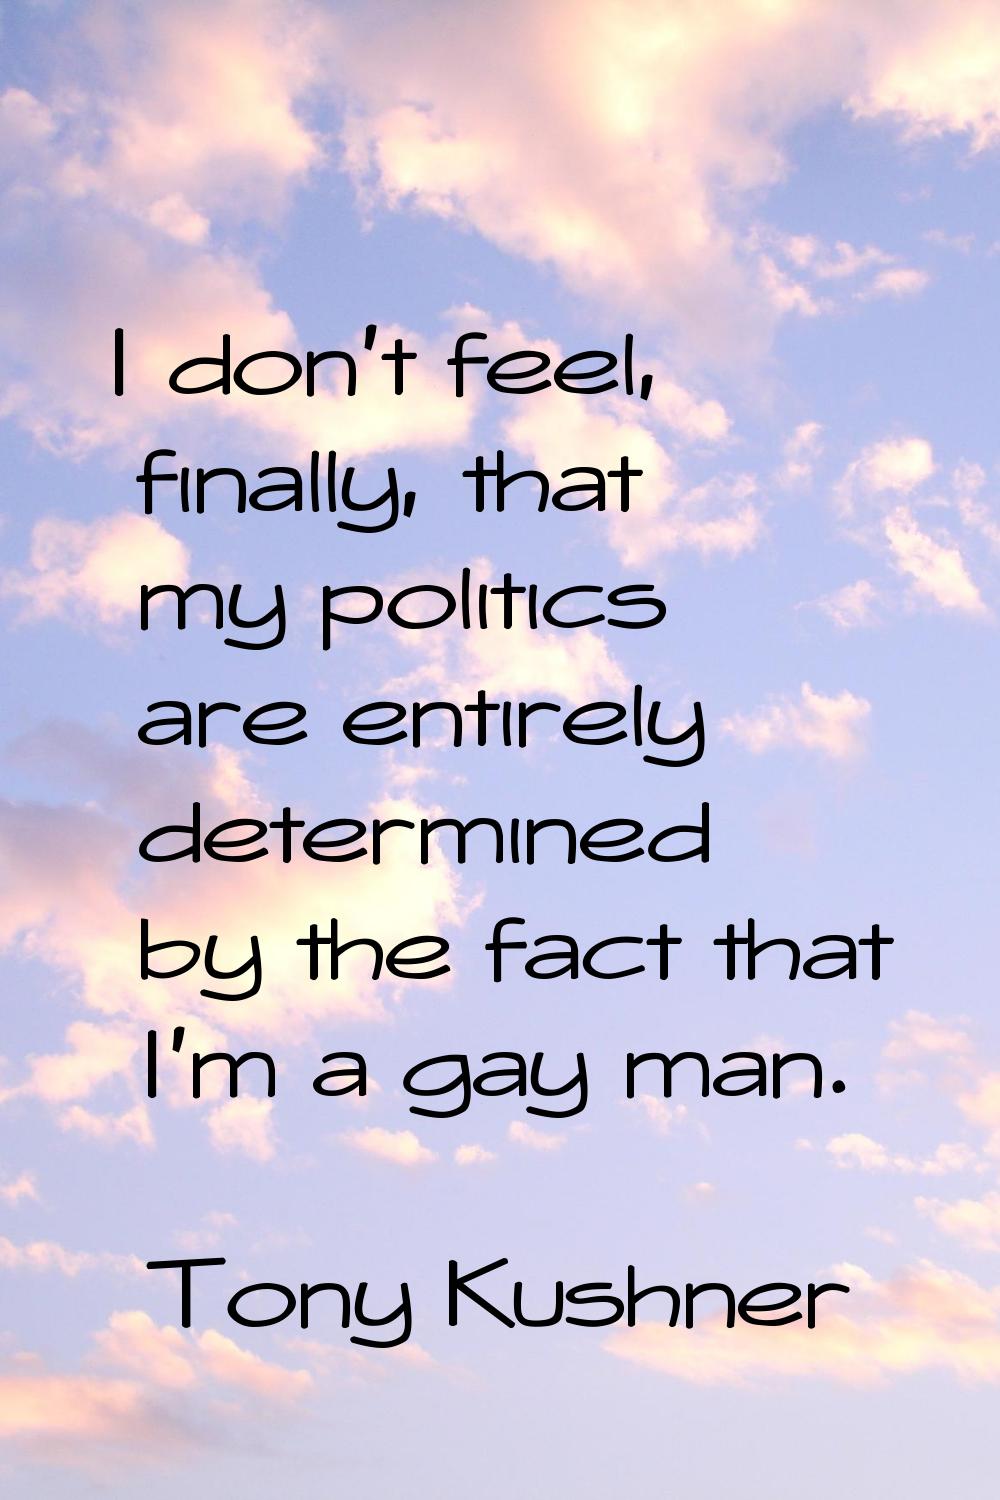 I don't feel, finally, that my politics are entirely determined by the fact that I'm a gay man.